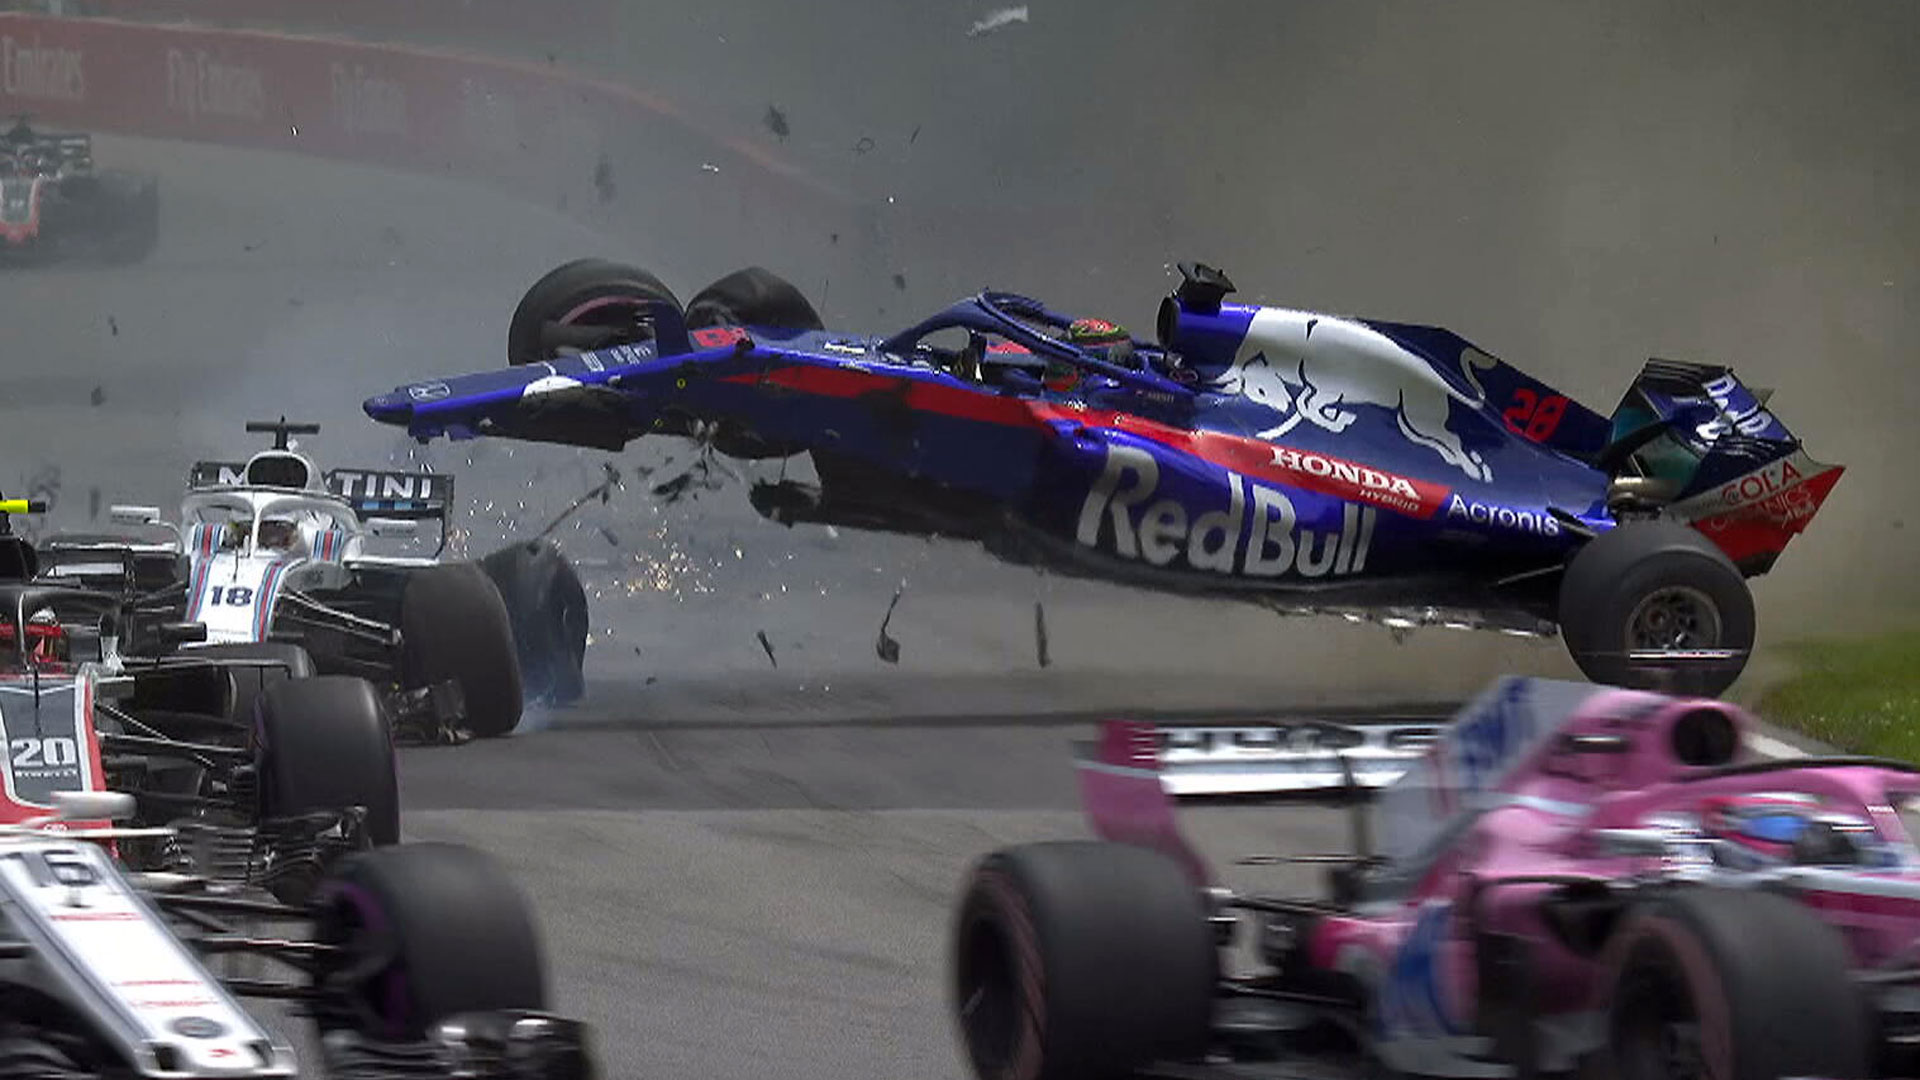 Hartley showed some speed in Canada qualifying and then crashed on lap 1